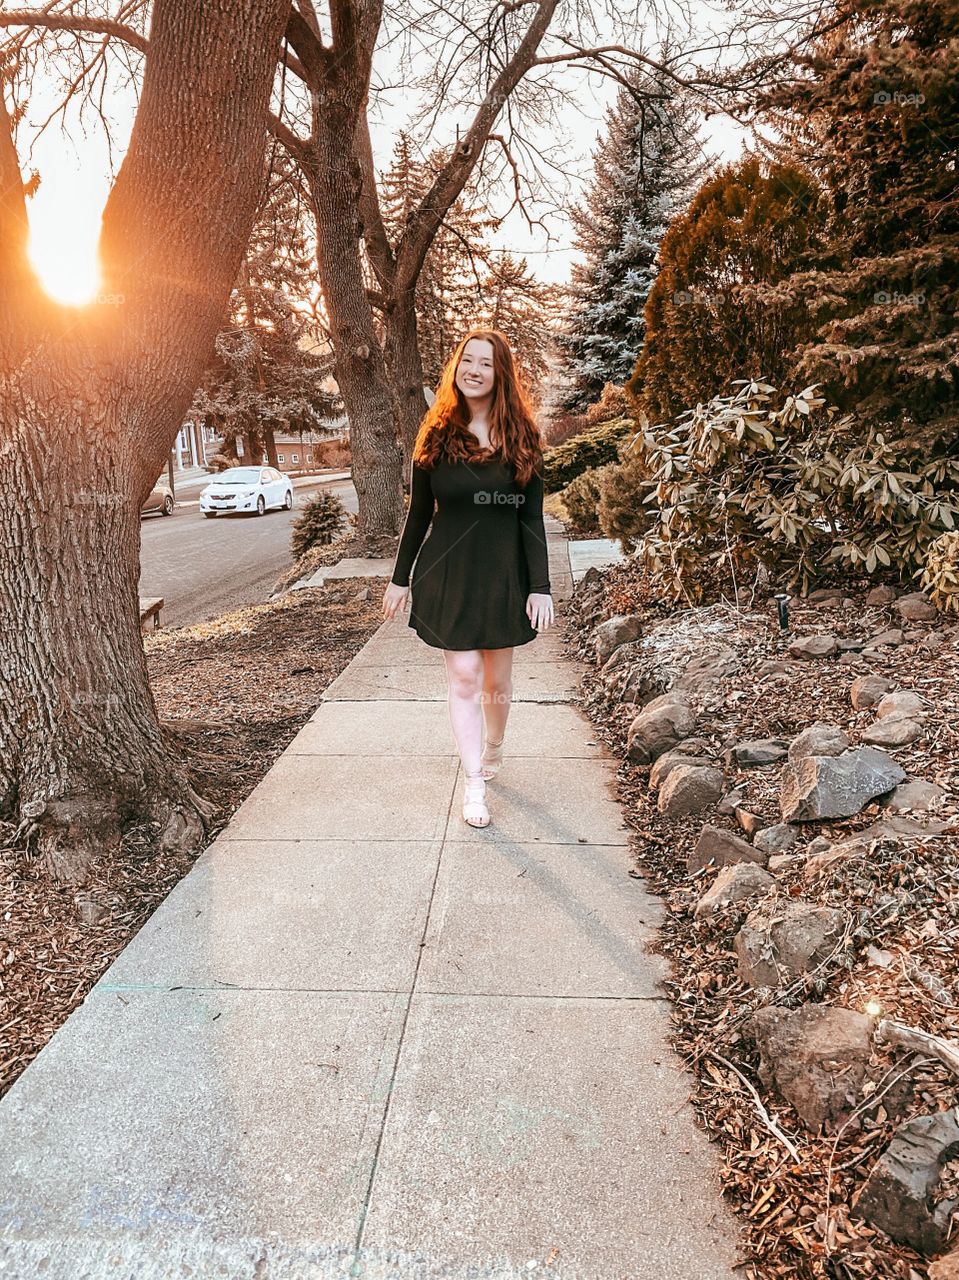 Beautiful image of a walking red-haired model on a decorative sidewalk surrounded by foliage on golden hour